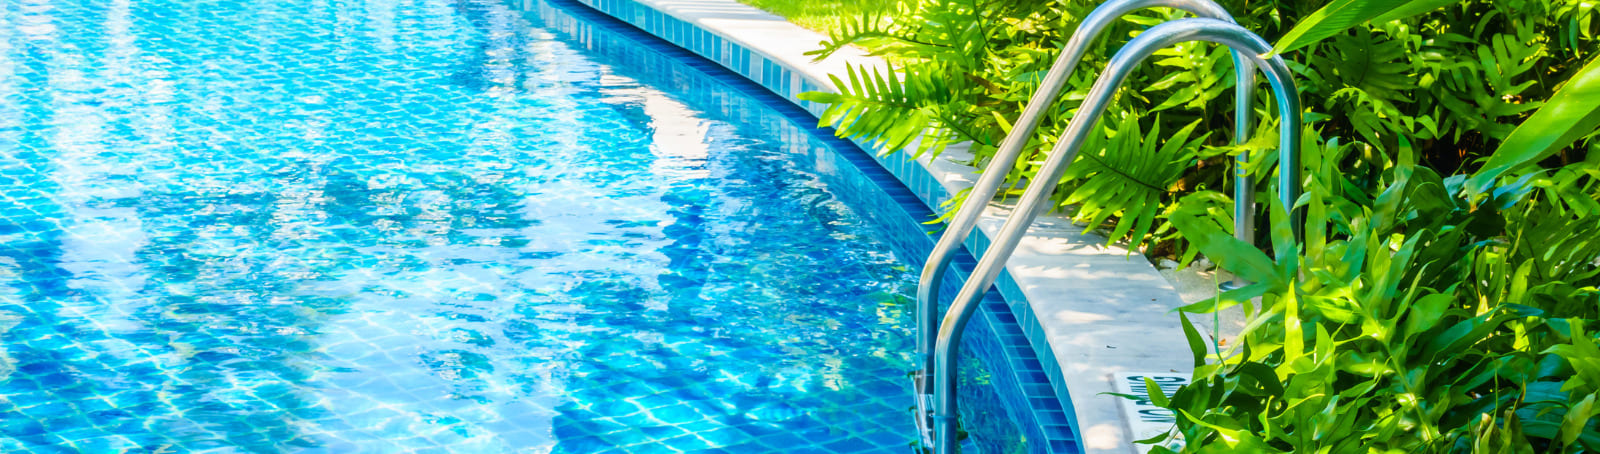 Legal Requirements for Building a Swimming Pool: A Comprehensive Guide by Pimlegal